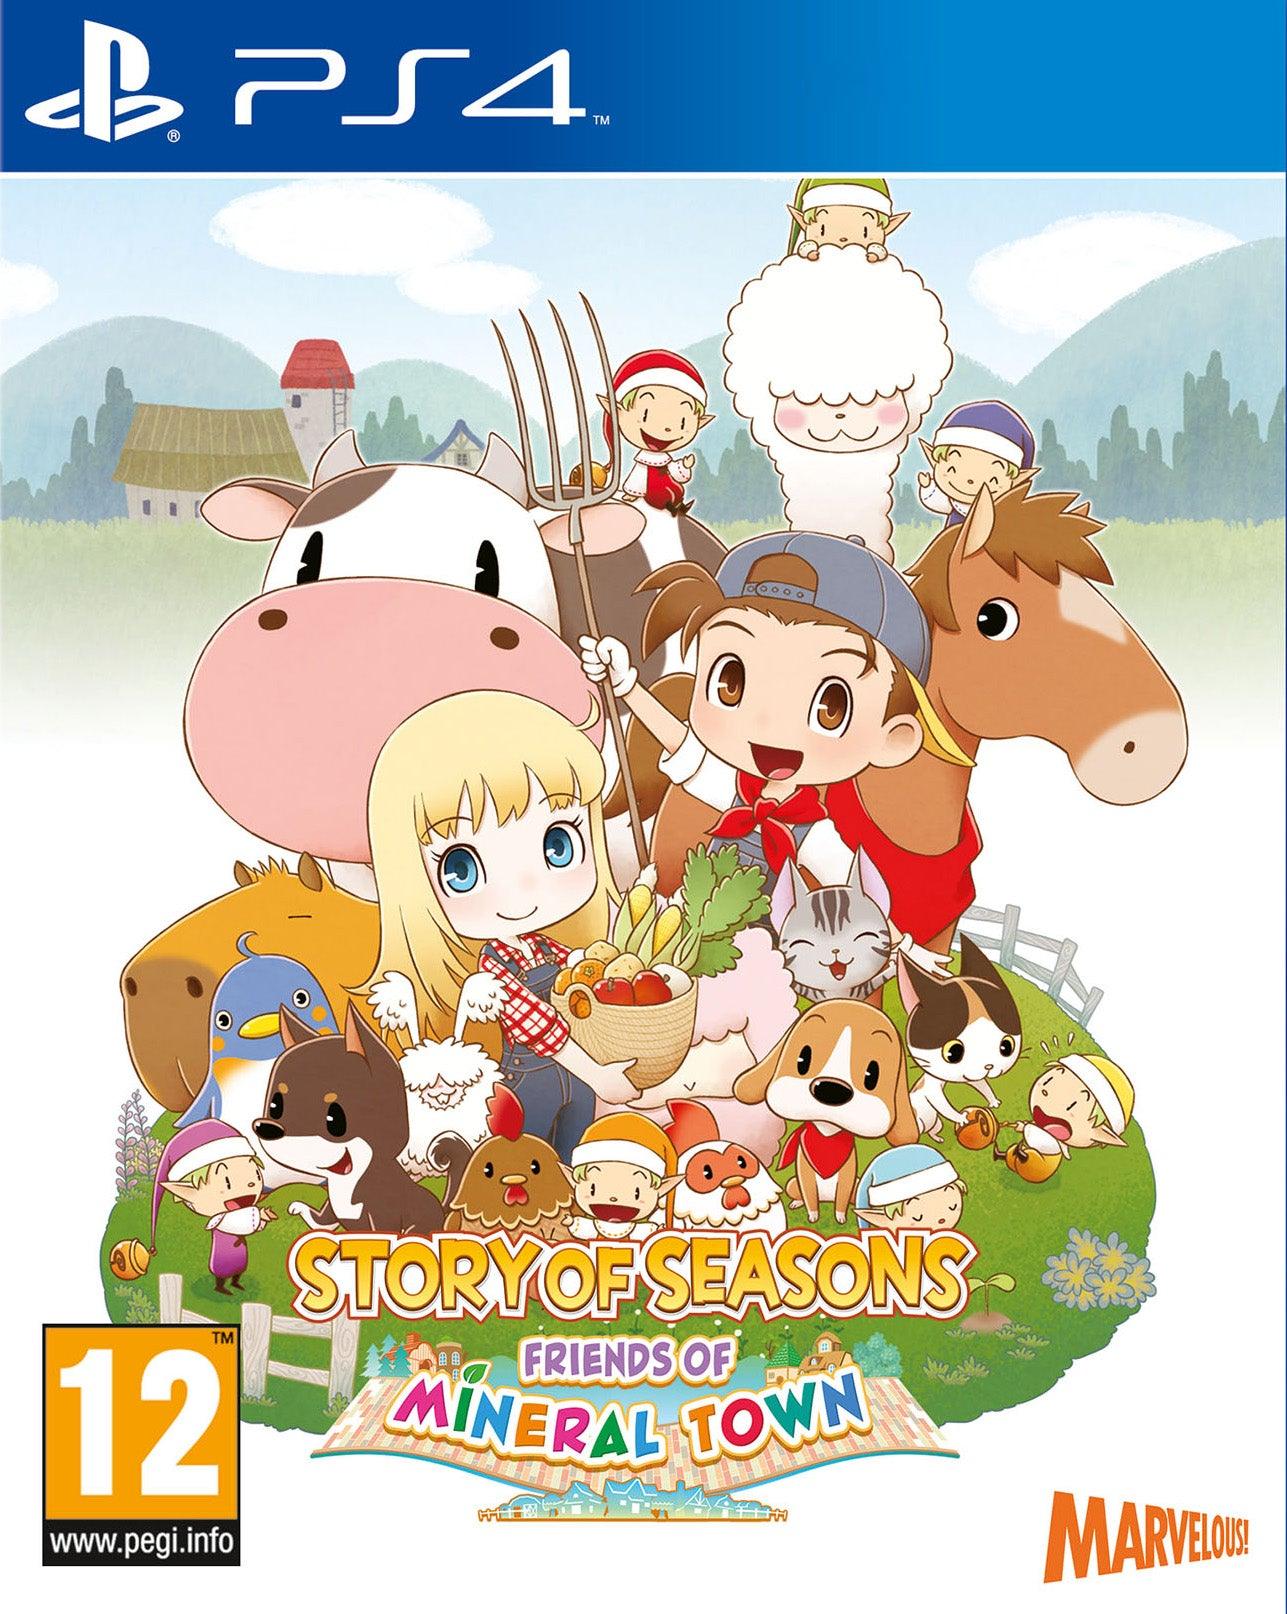 Story Of Seasons Fomt - Want a New Gadget